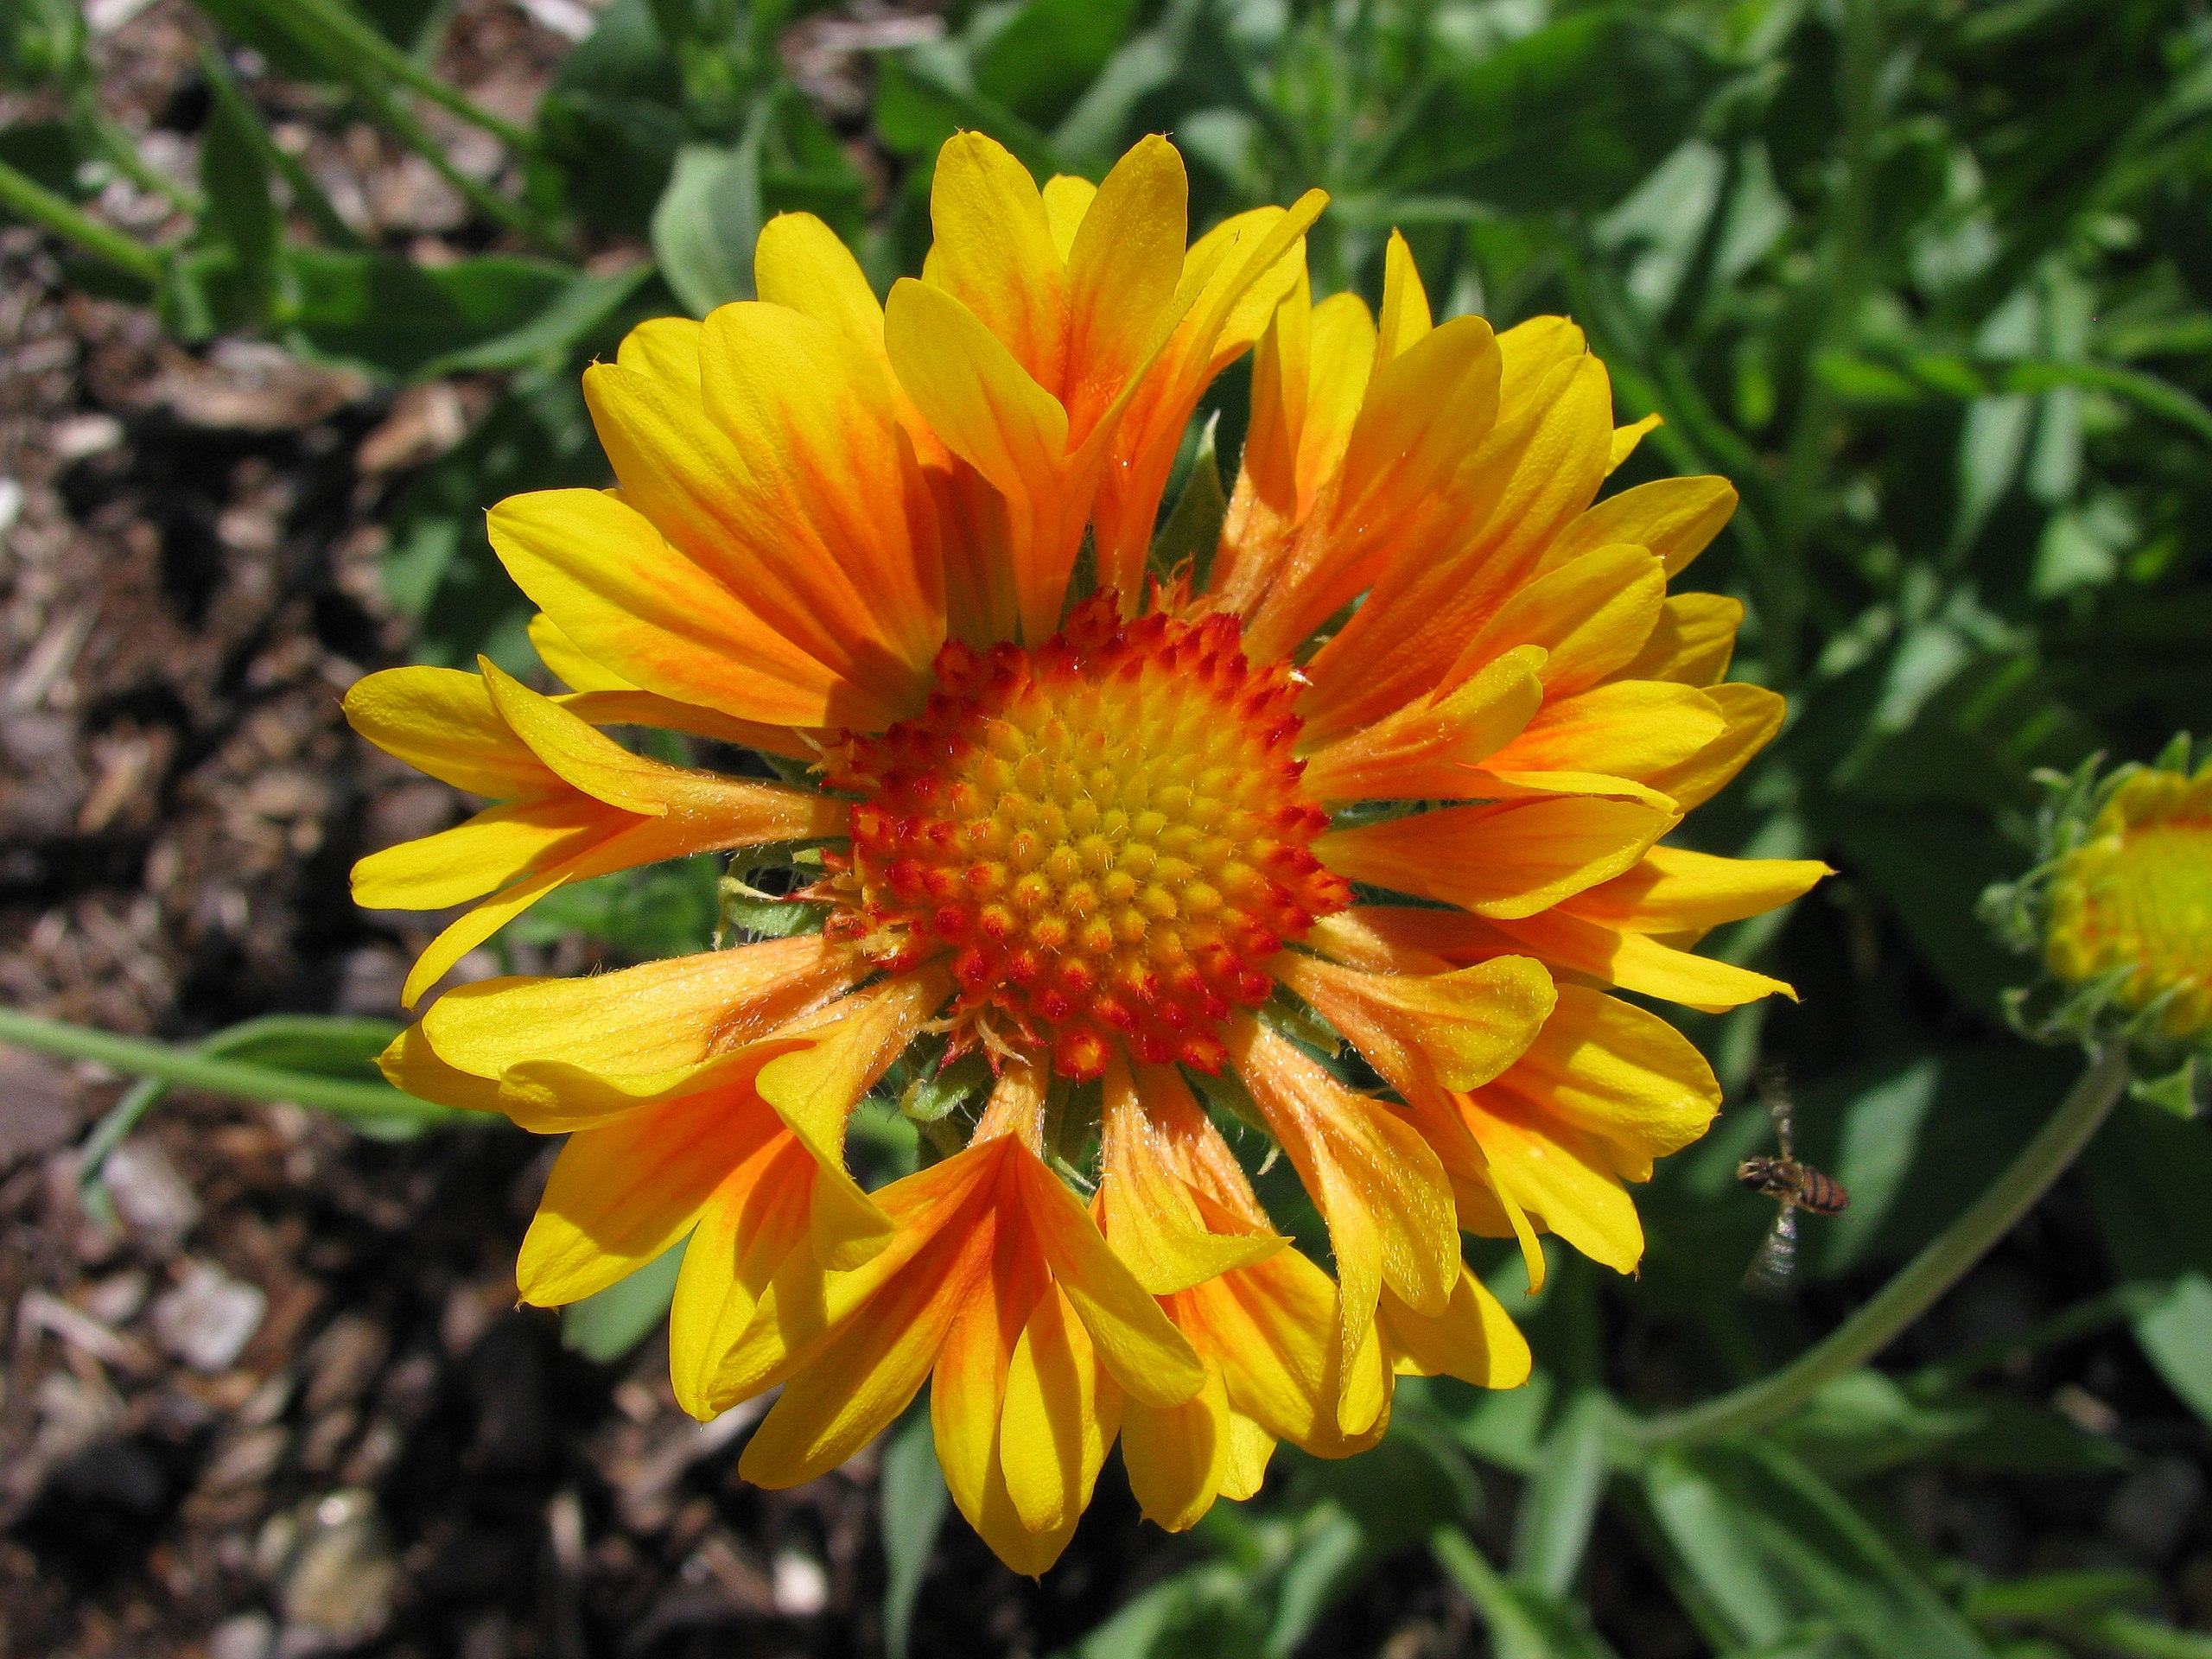 yellow-orange flower with yellow-orange center, green leaves and stems
